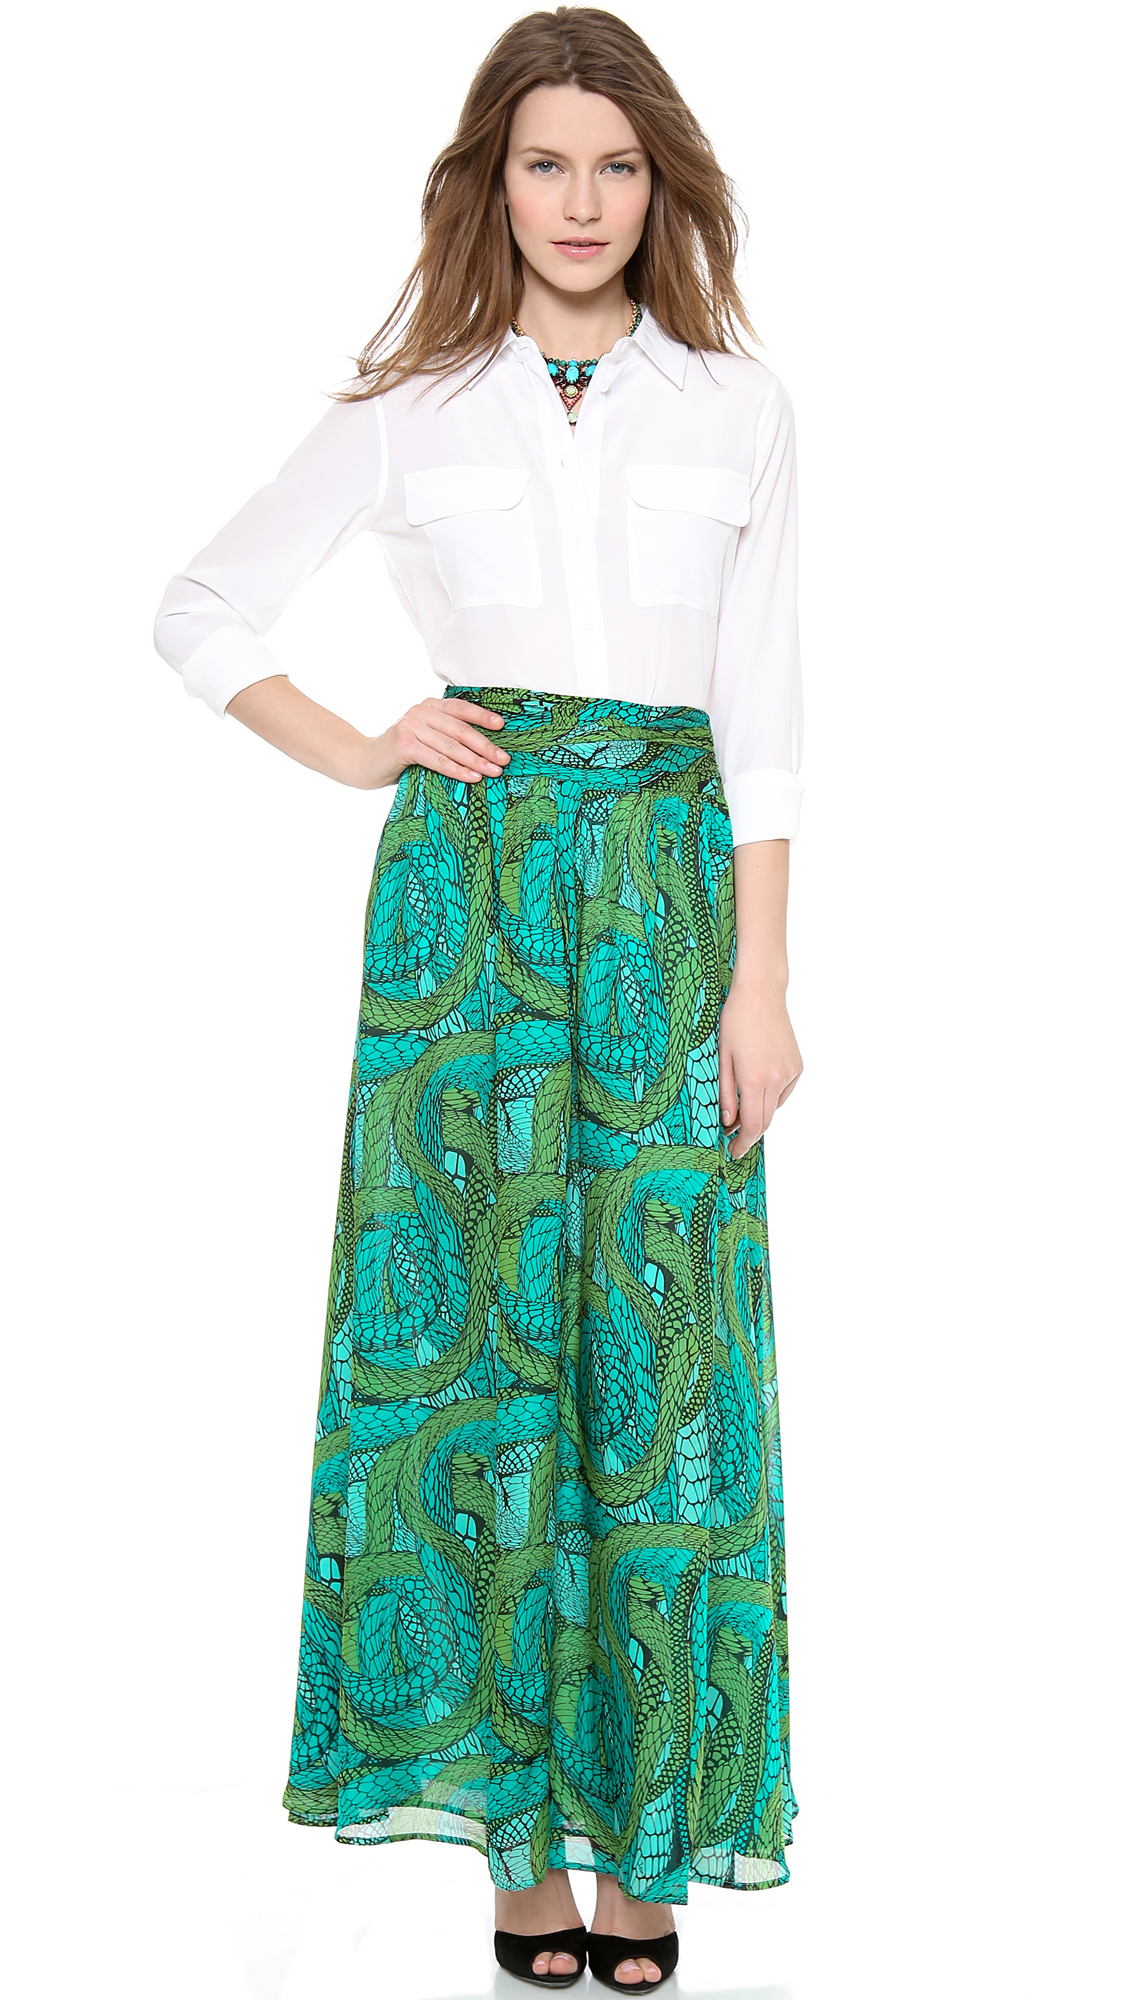 Lyst - Issa Printed Maxi Skirt Nile in Green